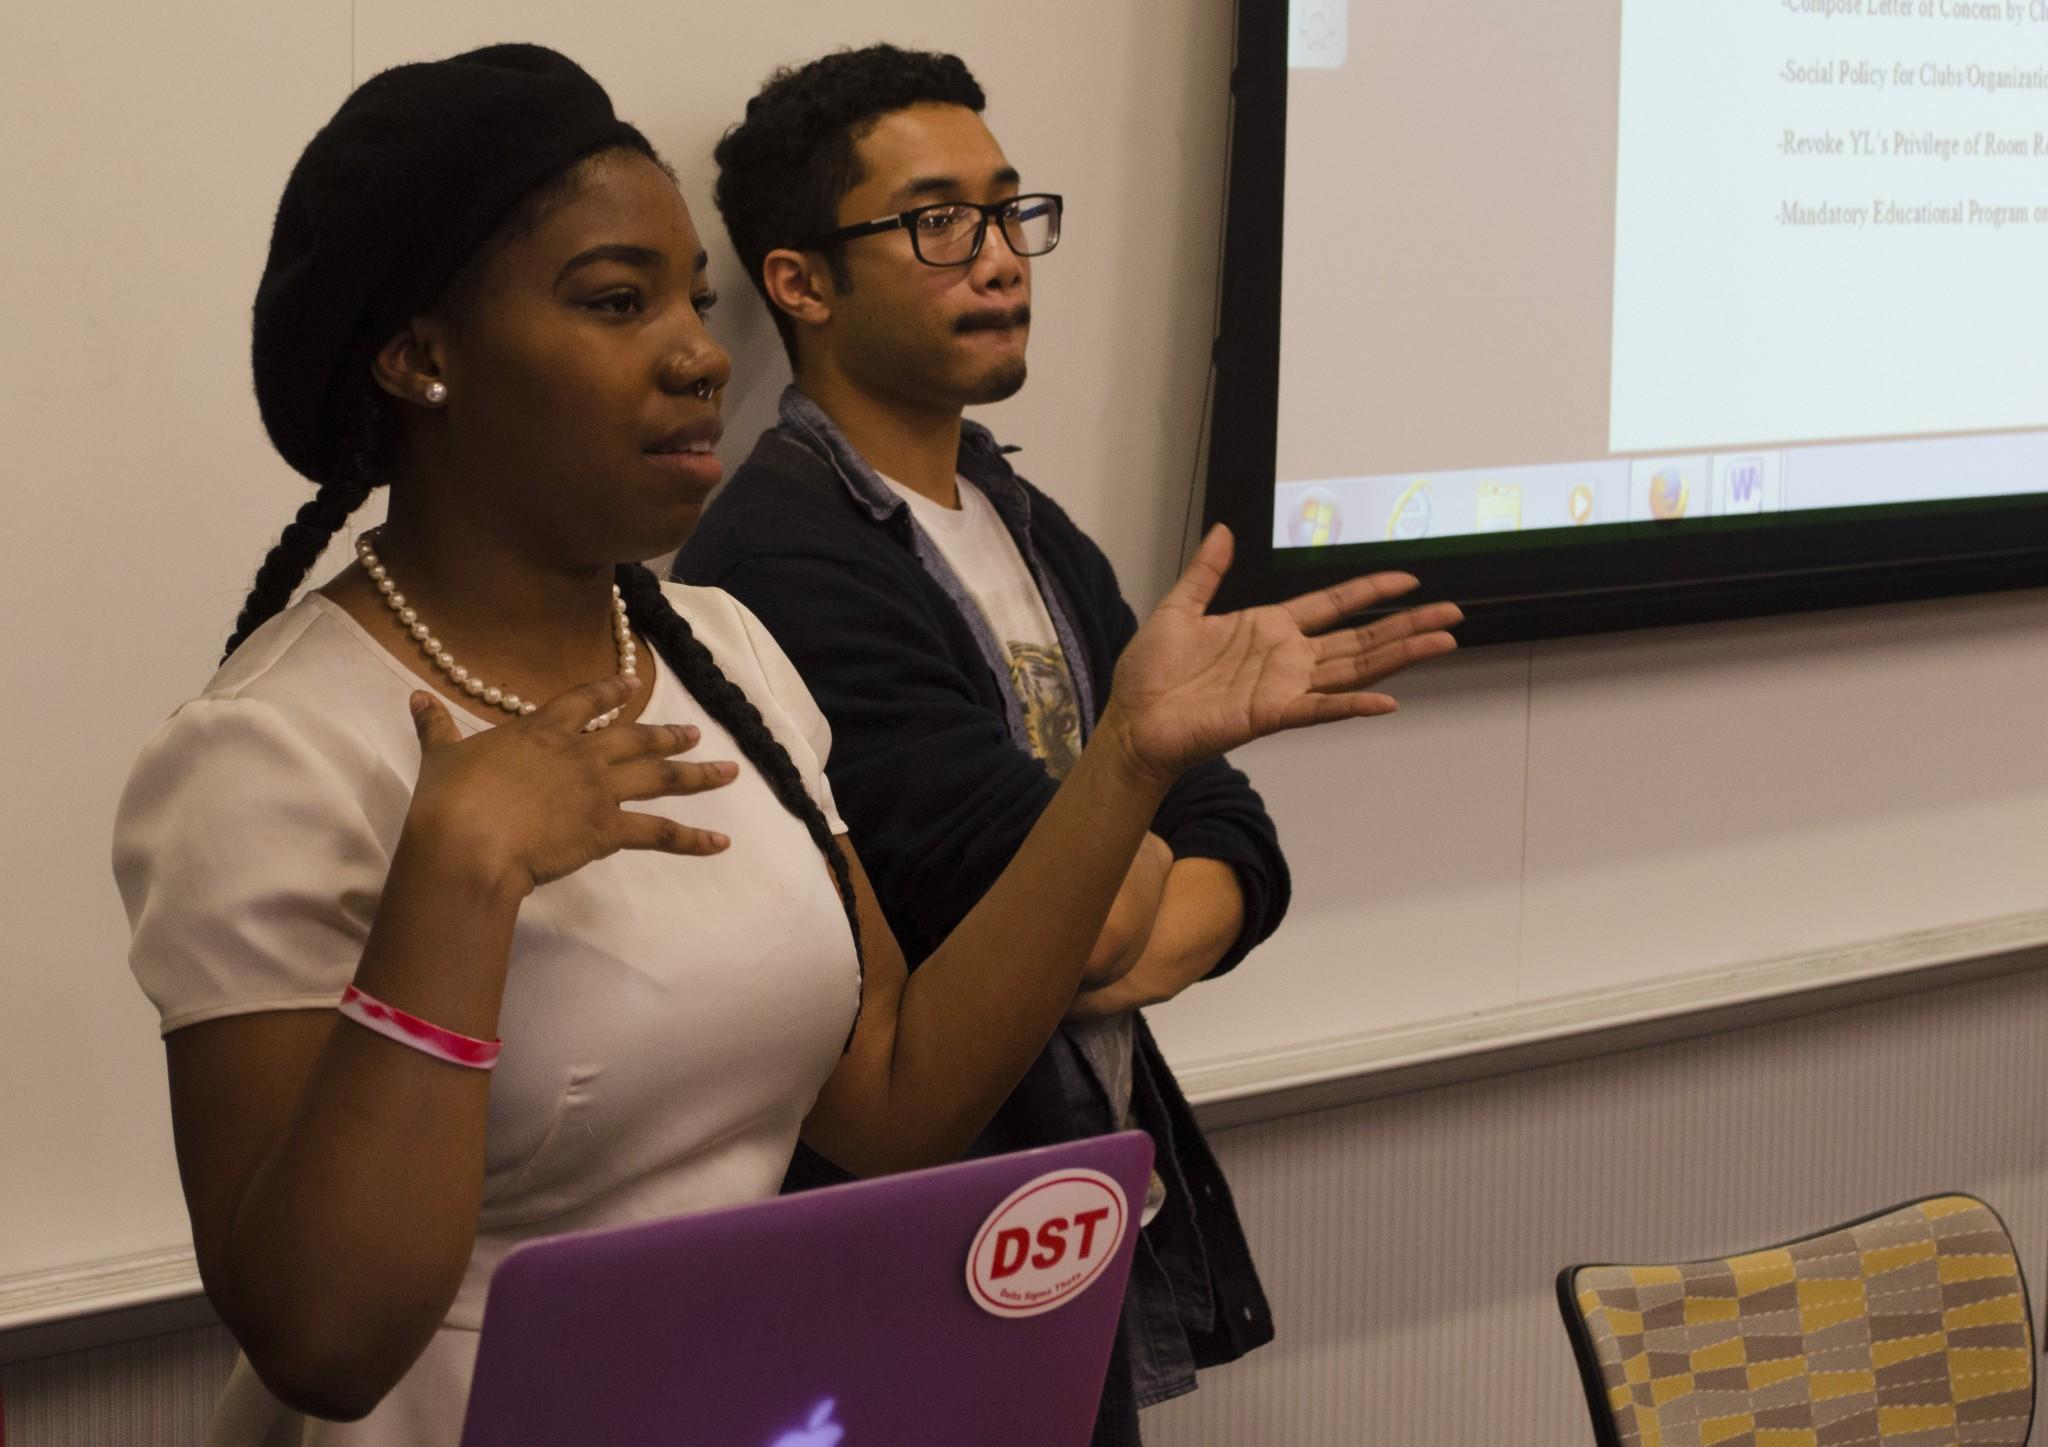 Seniors Mariah Webber (front) and Reggie Gravely (back) moderated the Dissecting the YL "Thug Life" Party discussion Monday night in Plemmons Student Union. | Photo: Michael Bragg, The Appalachian